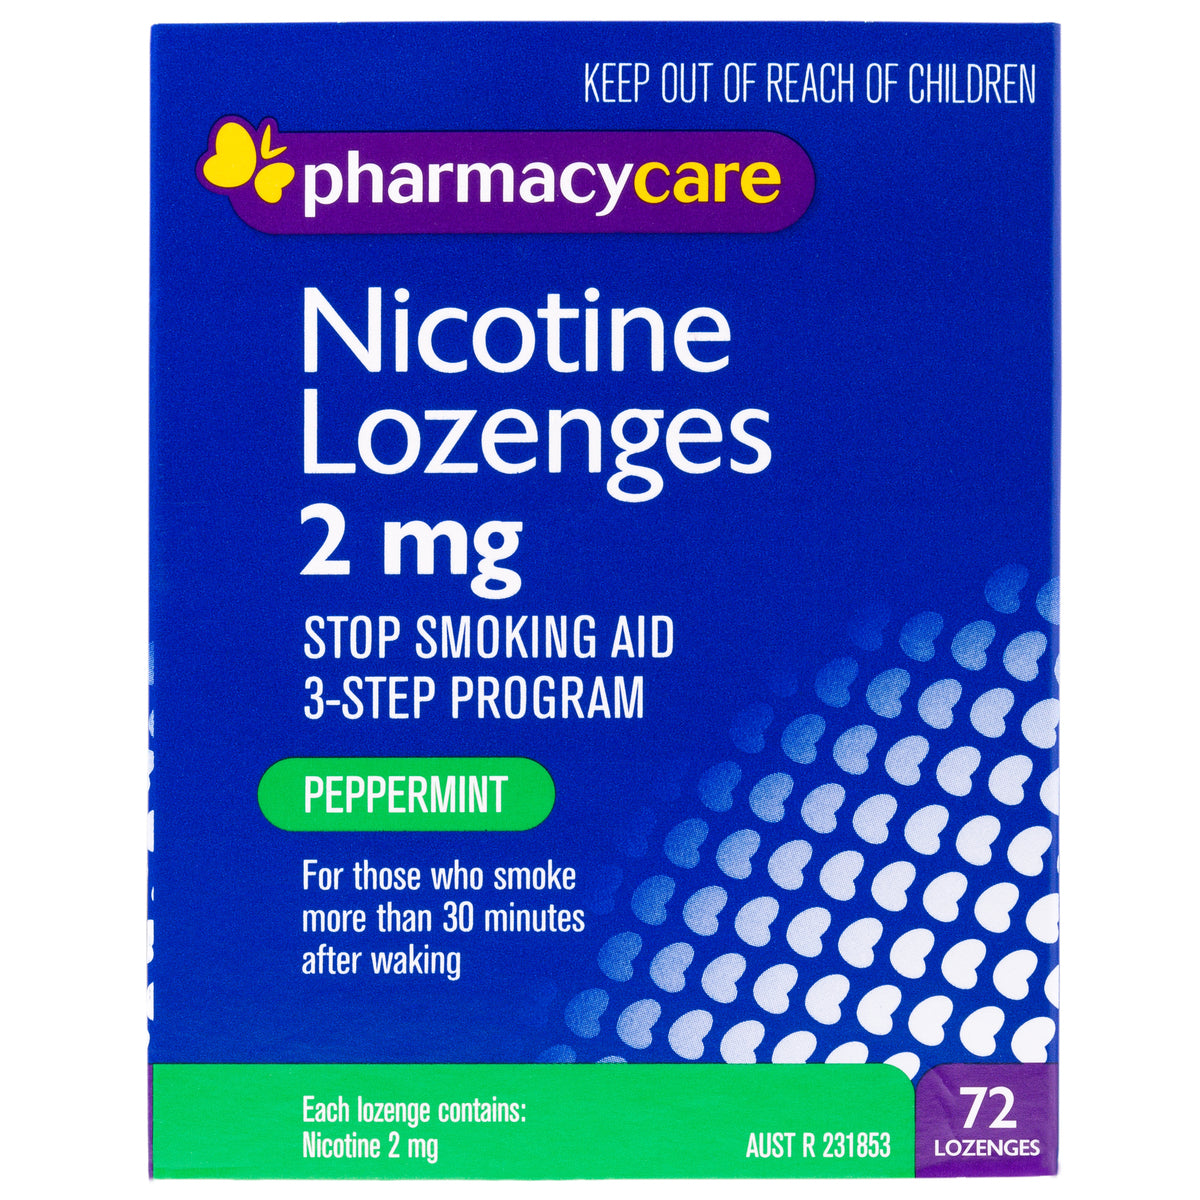 Pharmacy Care Nicotine Lozenges 2 mg Peppermint - 72 Pack